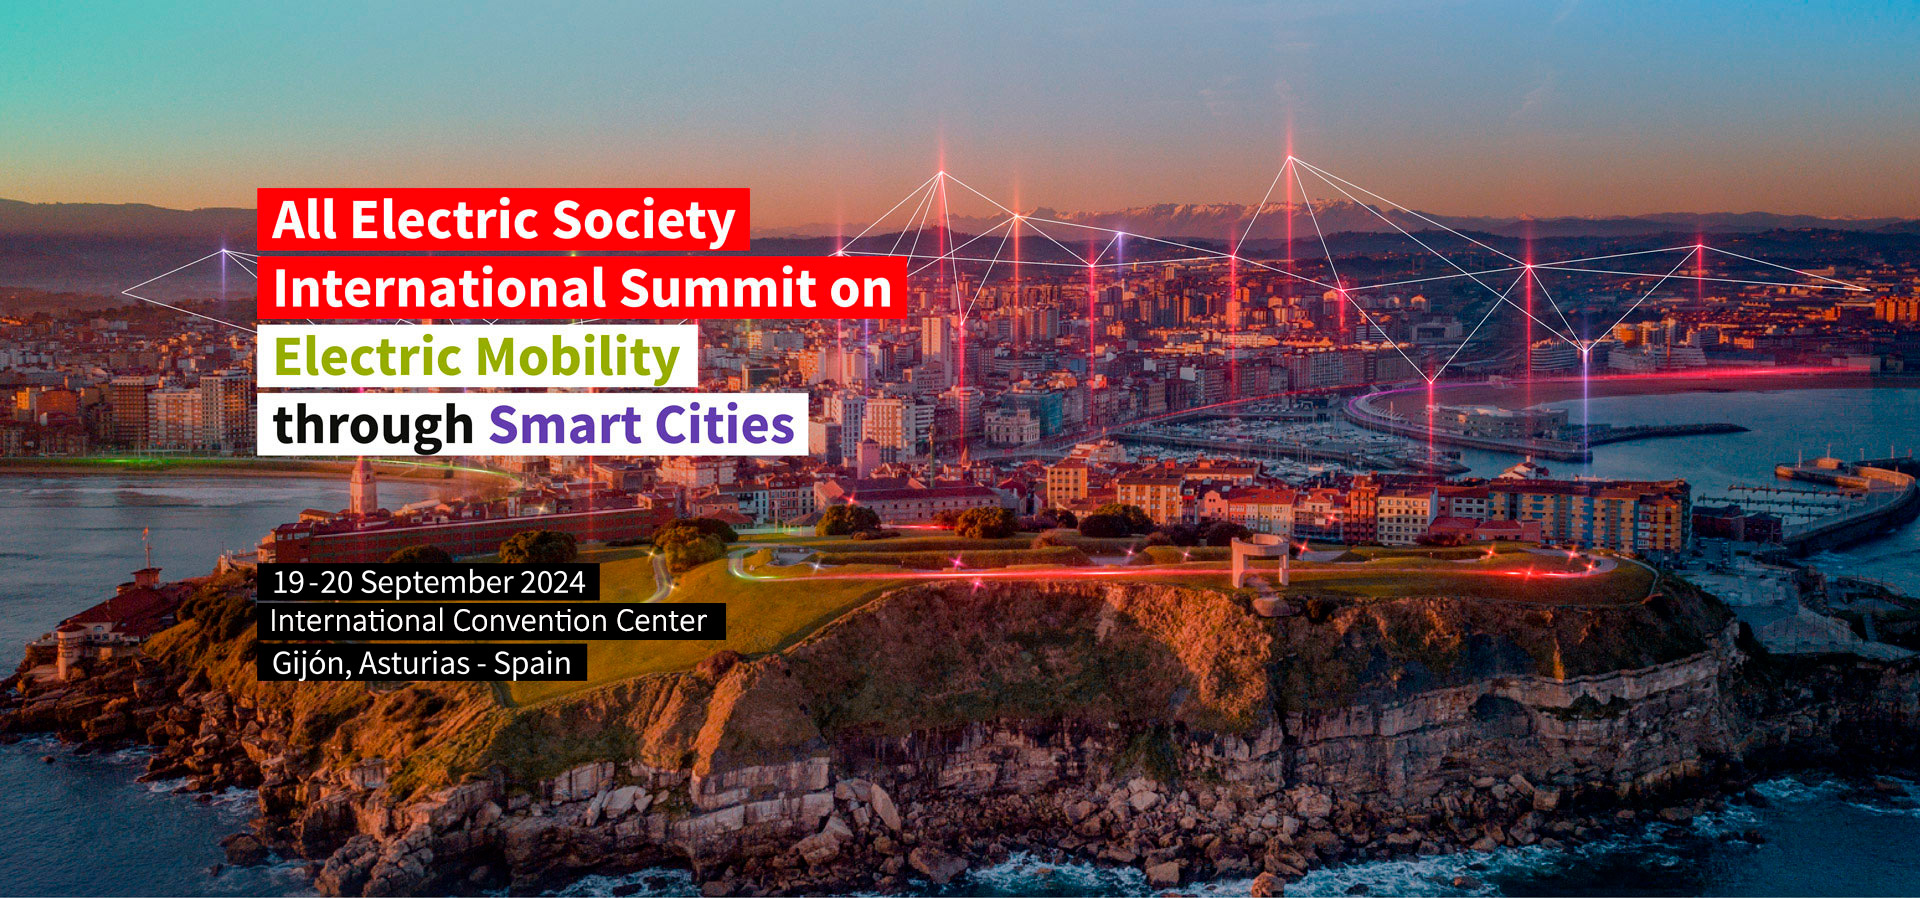 All Electric Society (AES) International Summit on Electric Mobility and Smart Cities